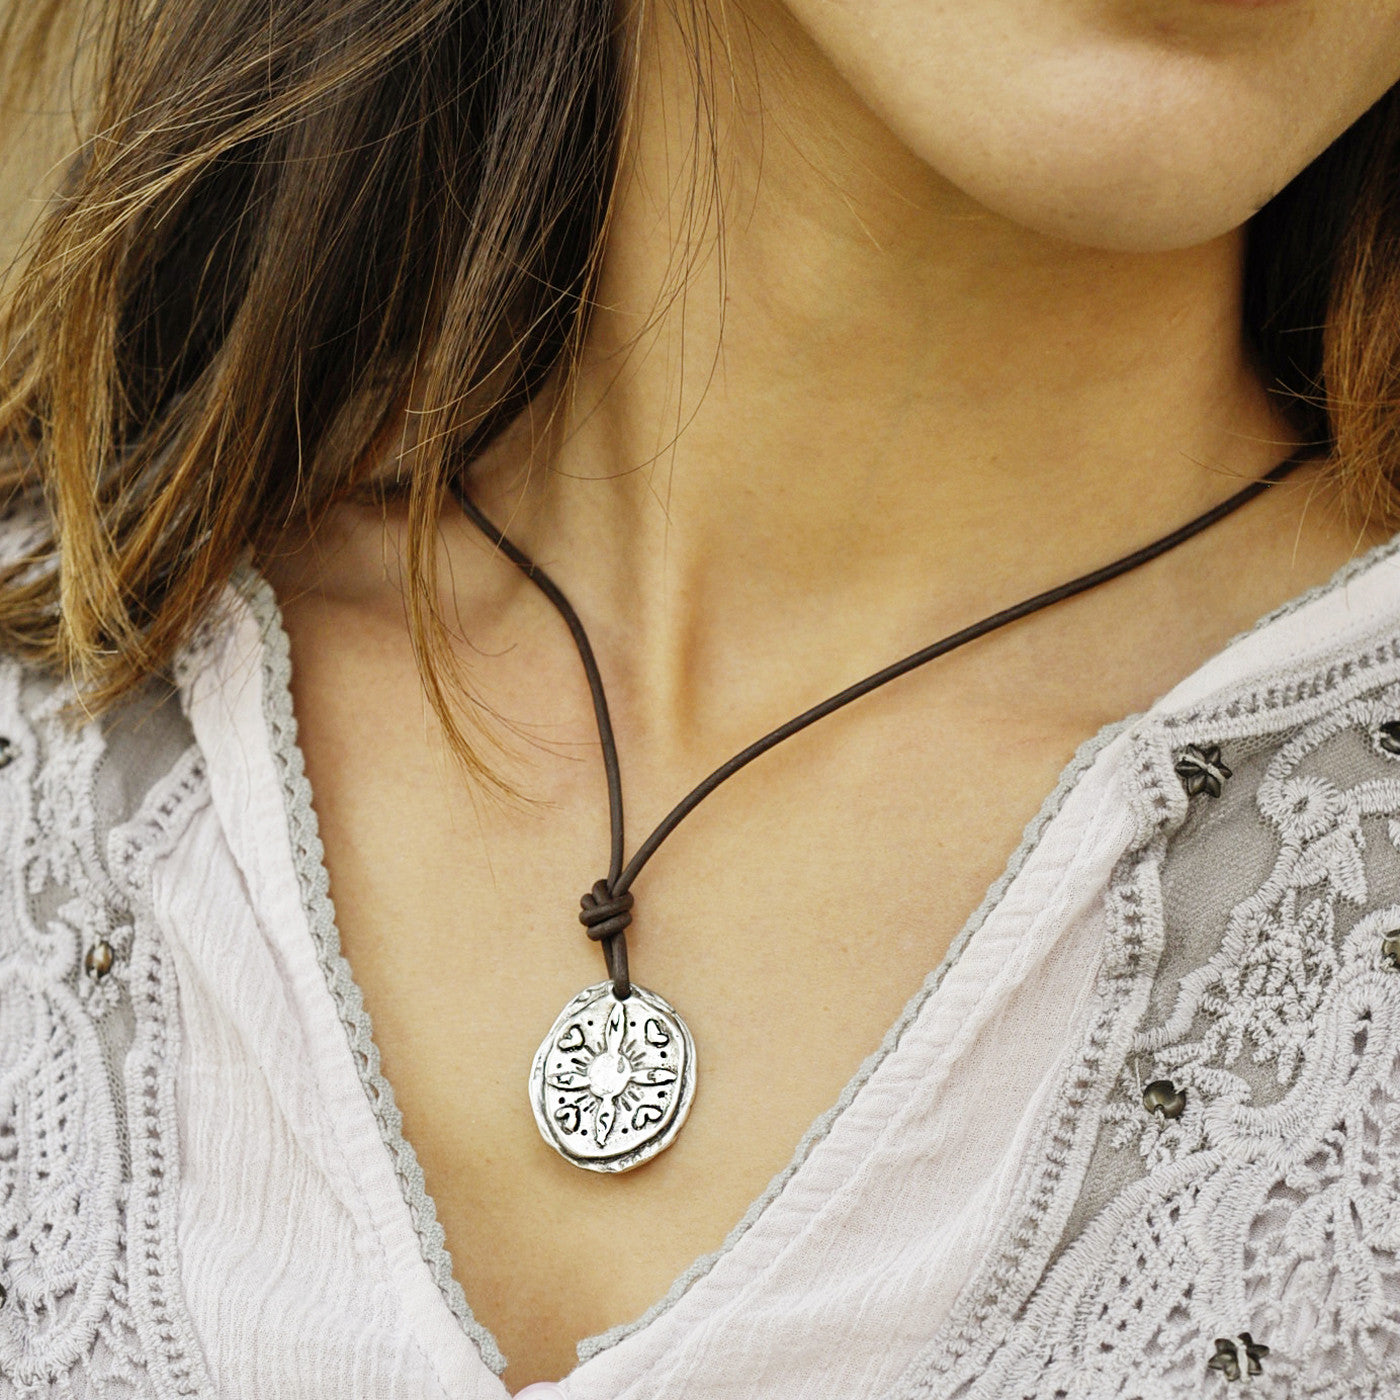 Compass necklace with the inspiring words 